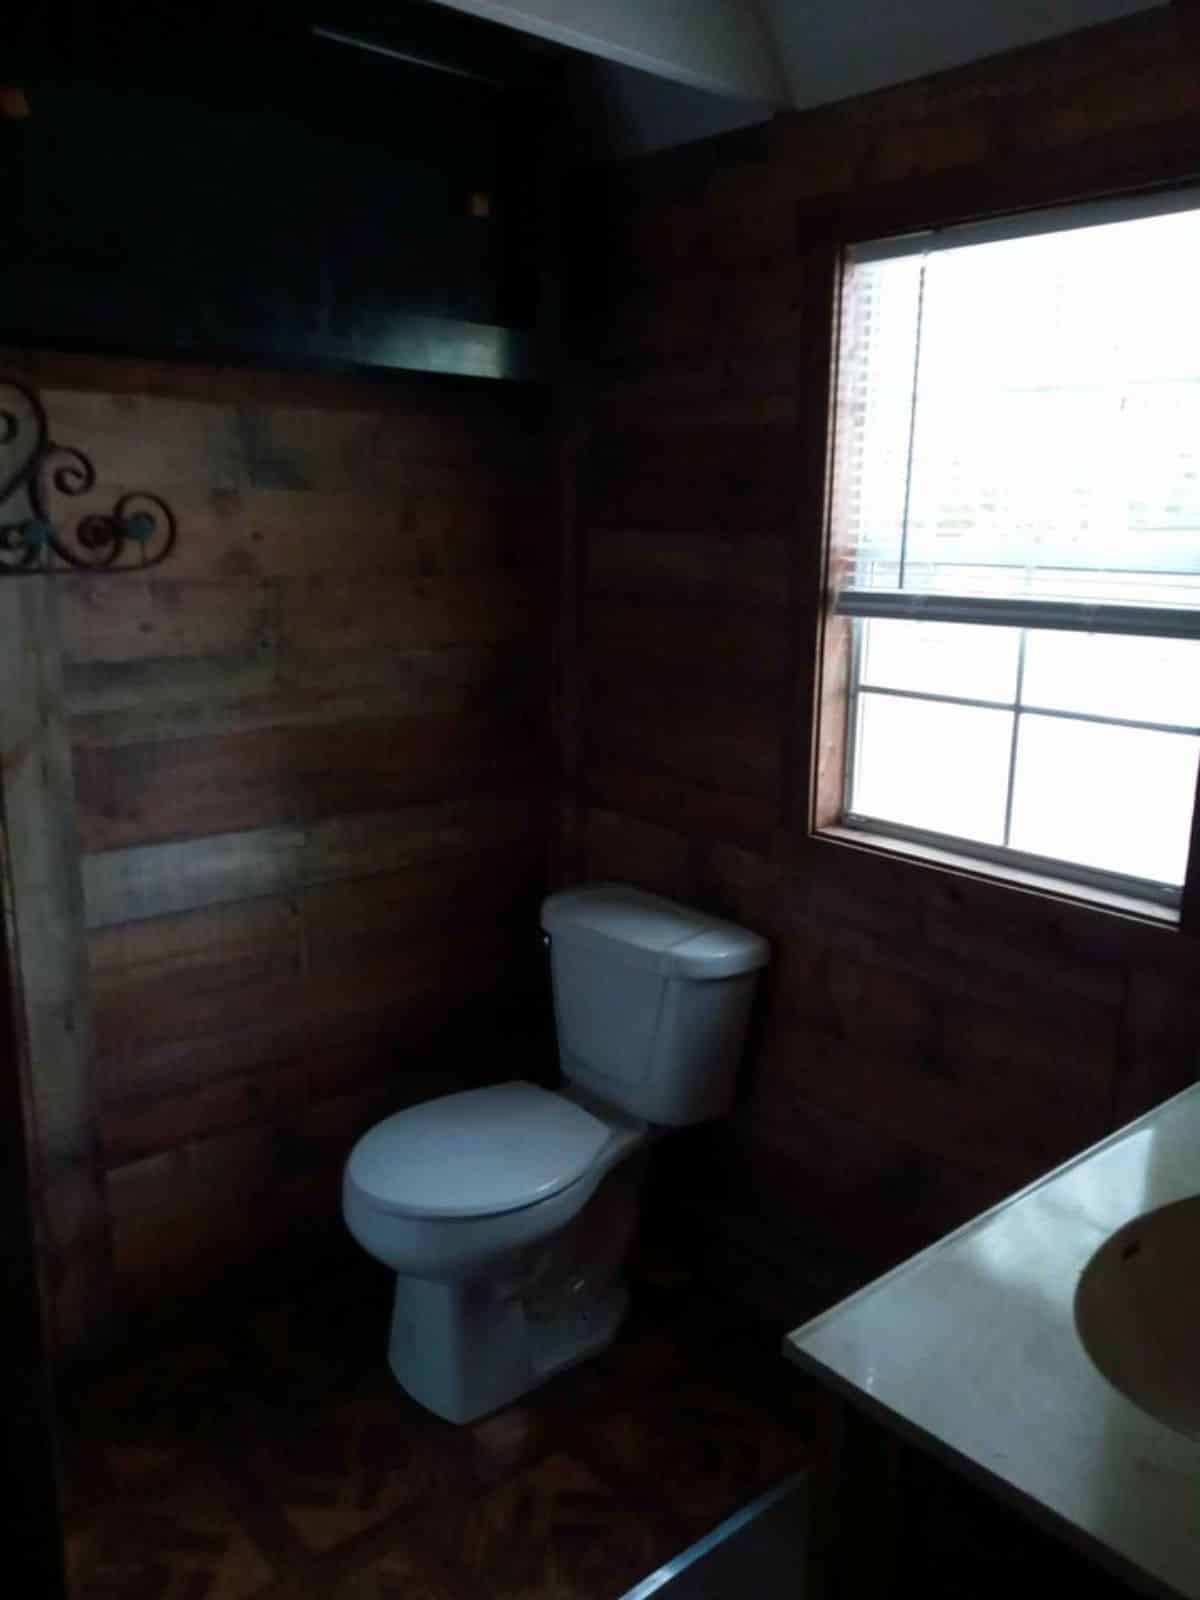 Bathroom of Tiny Home With Lofts has all the standard fitings